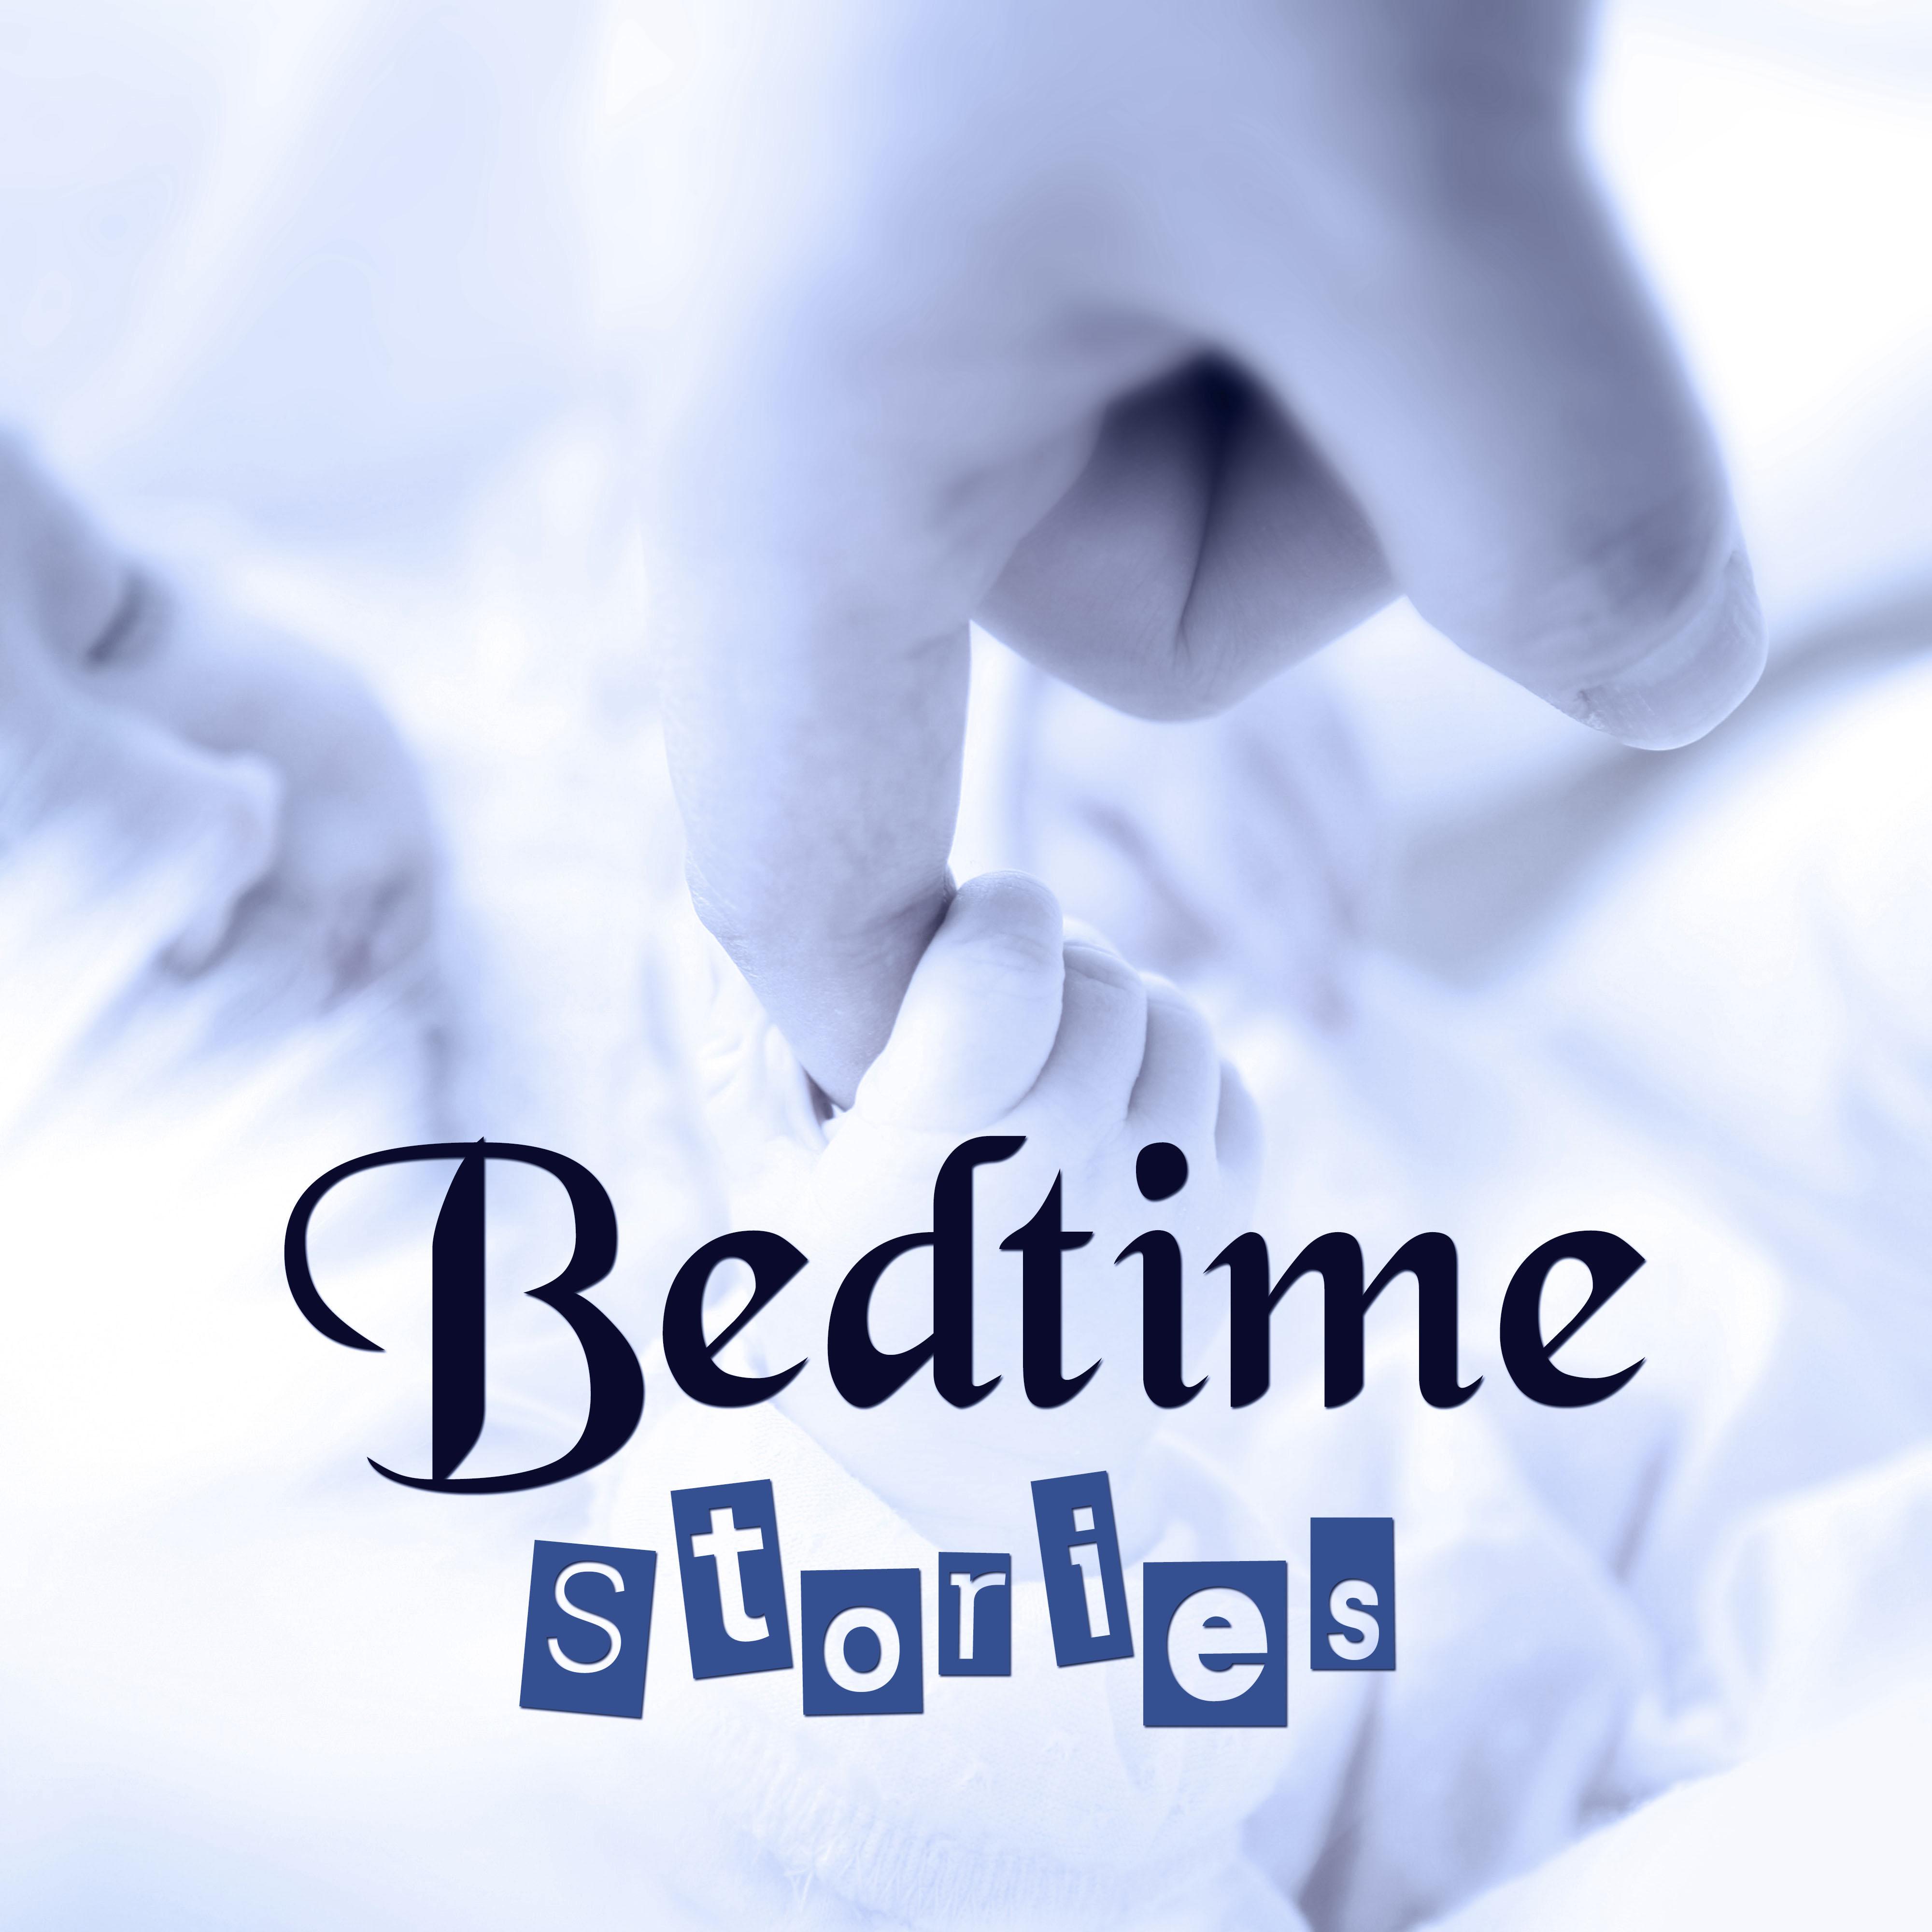 Bedtime Stories  Calm and Quiet Night, Music to Help You Sleep, Soothing Background Music, Restful Sleep, Inner Peace